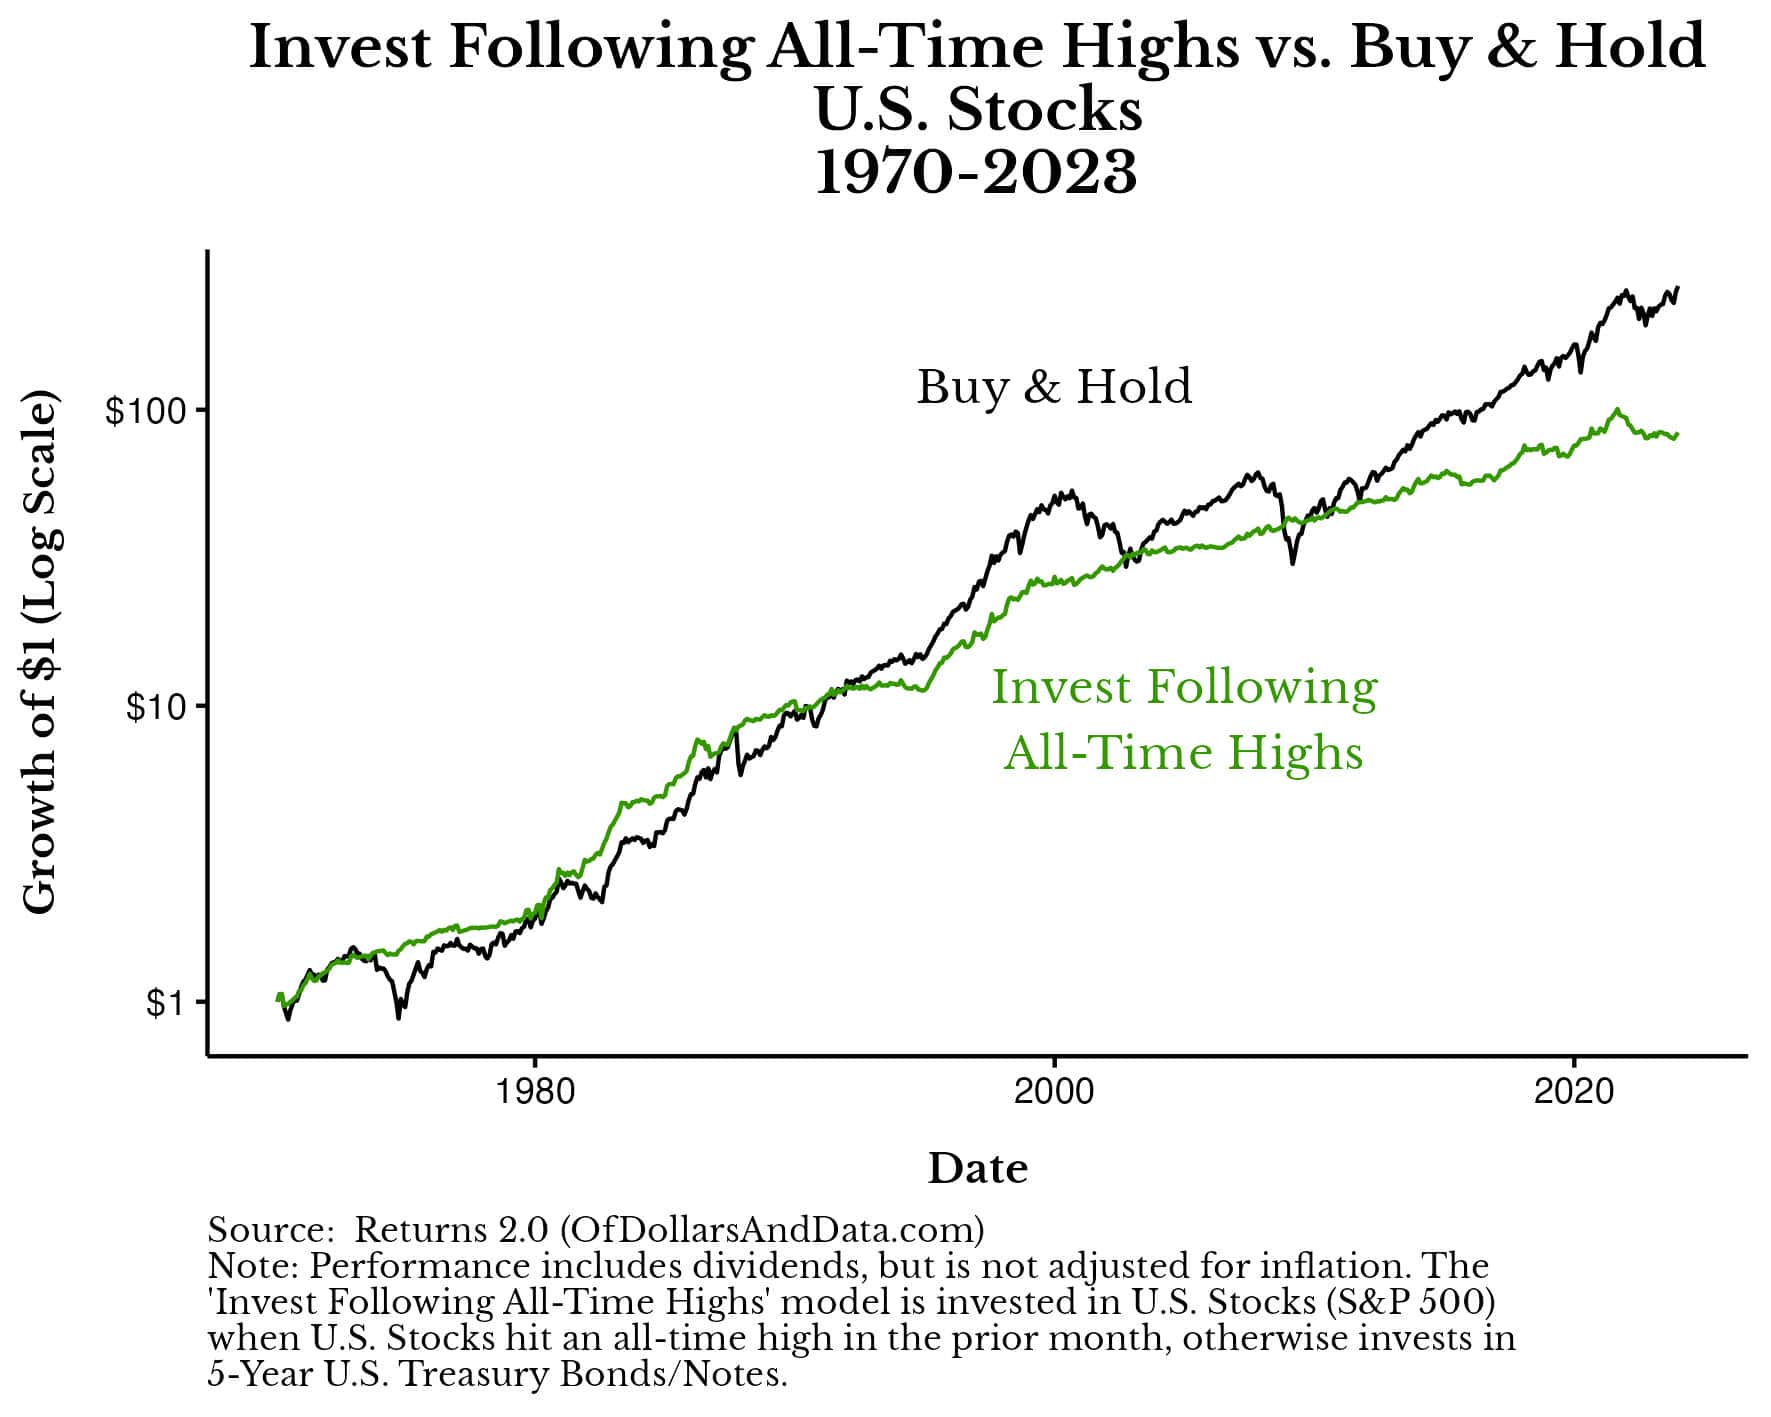 Comparing a Buy & Hold U.S. stock strategy vs. a strategy that invests in U.S. stocks only in months following all-time highs otherwise it is invested in U.S. bonds.